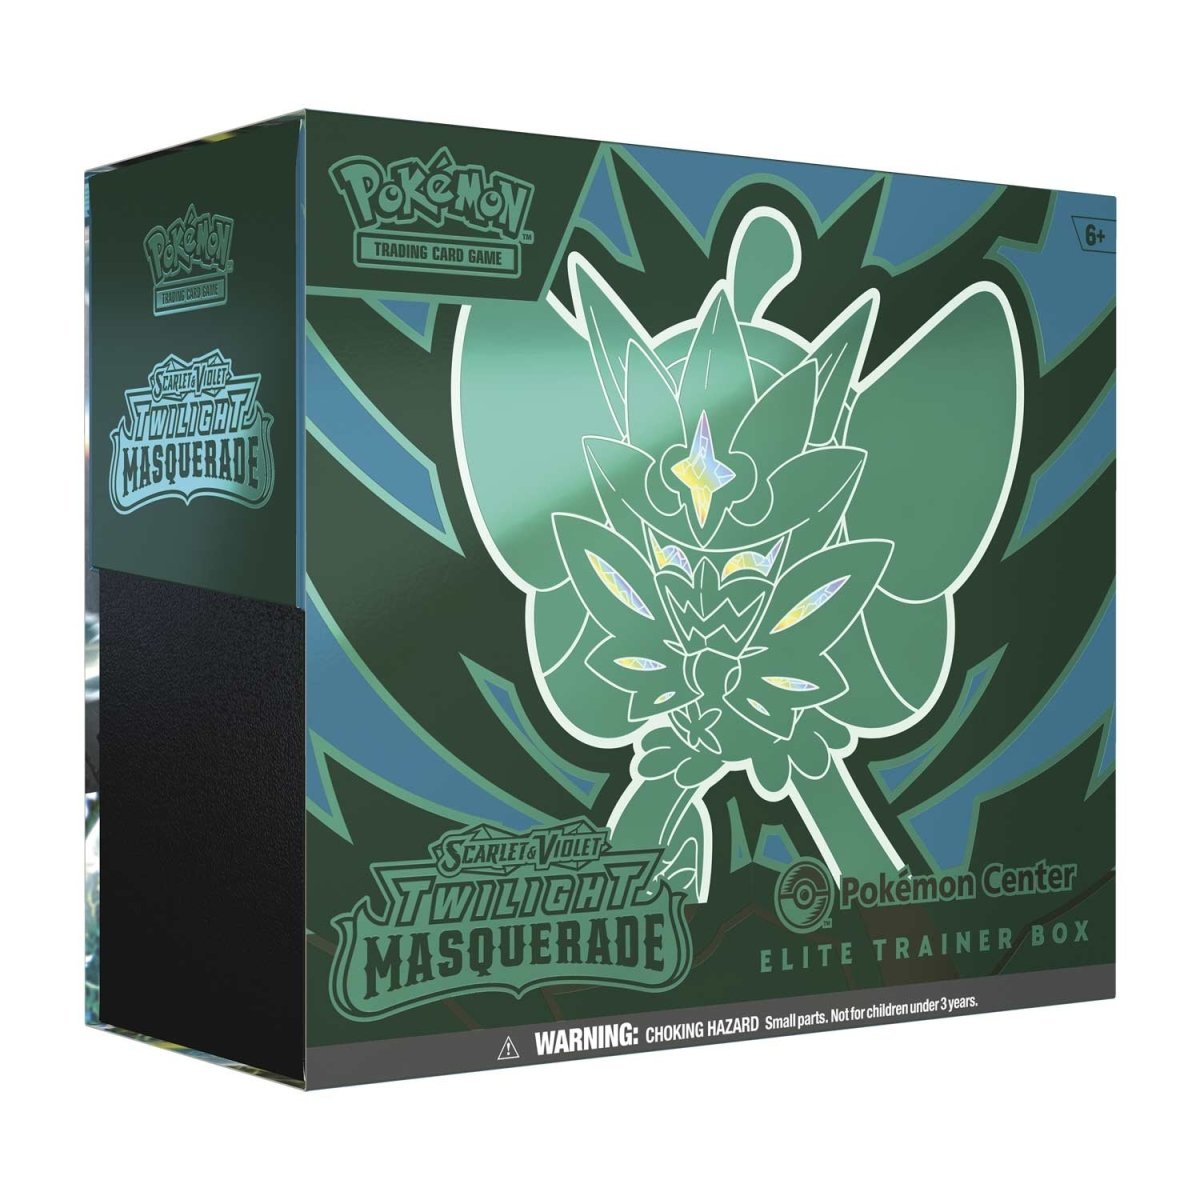 Pokemon Trading Card Game Twilight Masquerade Expansion Arrives in May Ogrepon